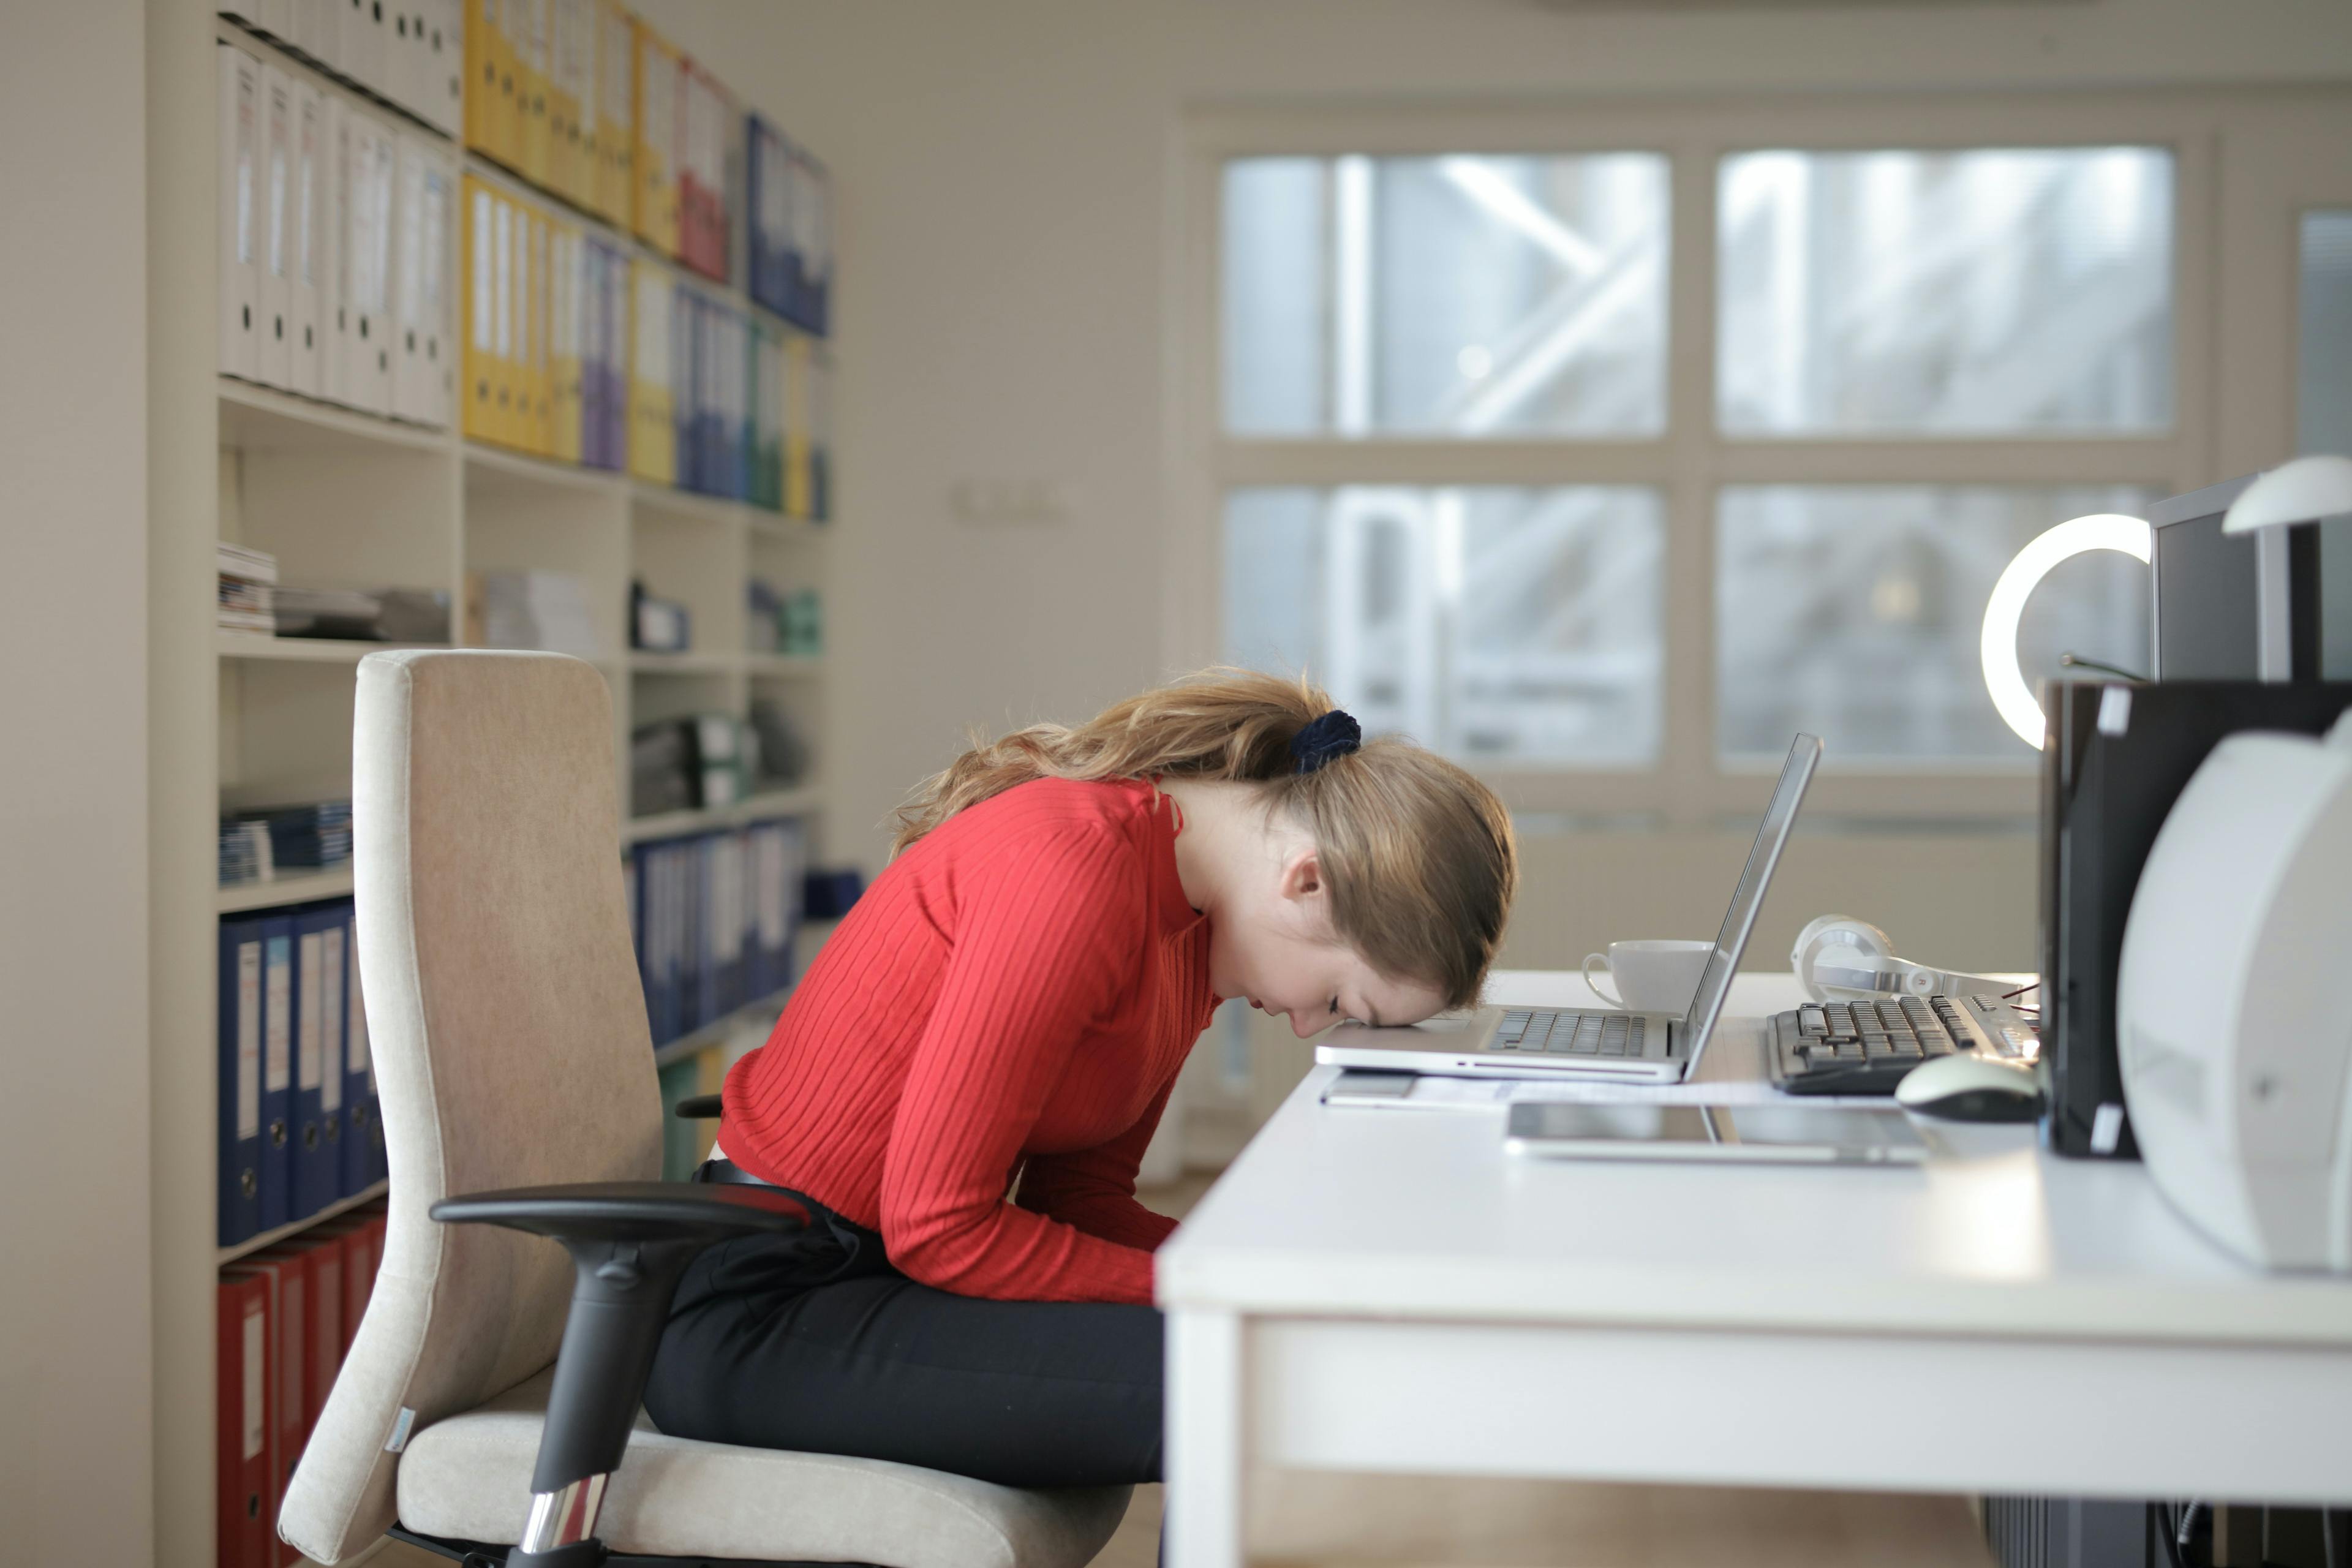 Feeling Unmotivated at Work? Here Are 11 Ways to Refuel Your Drive